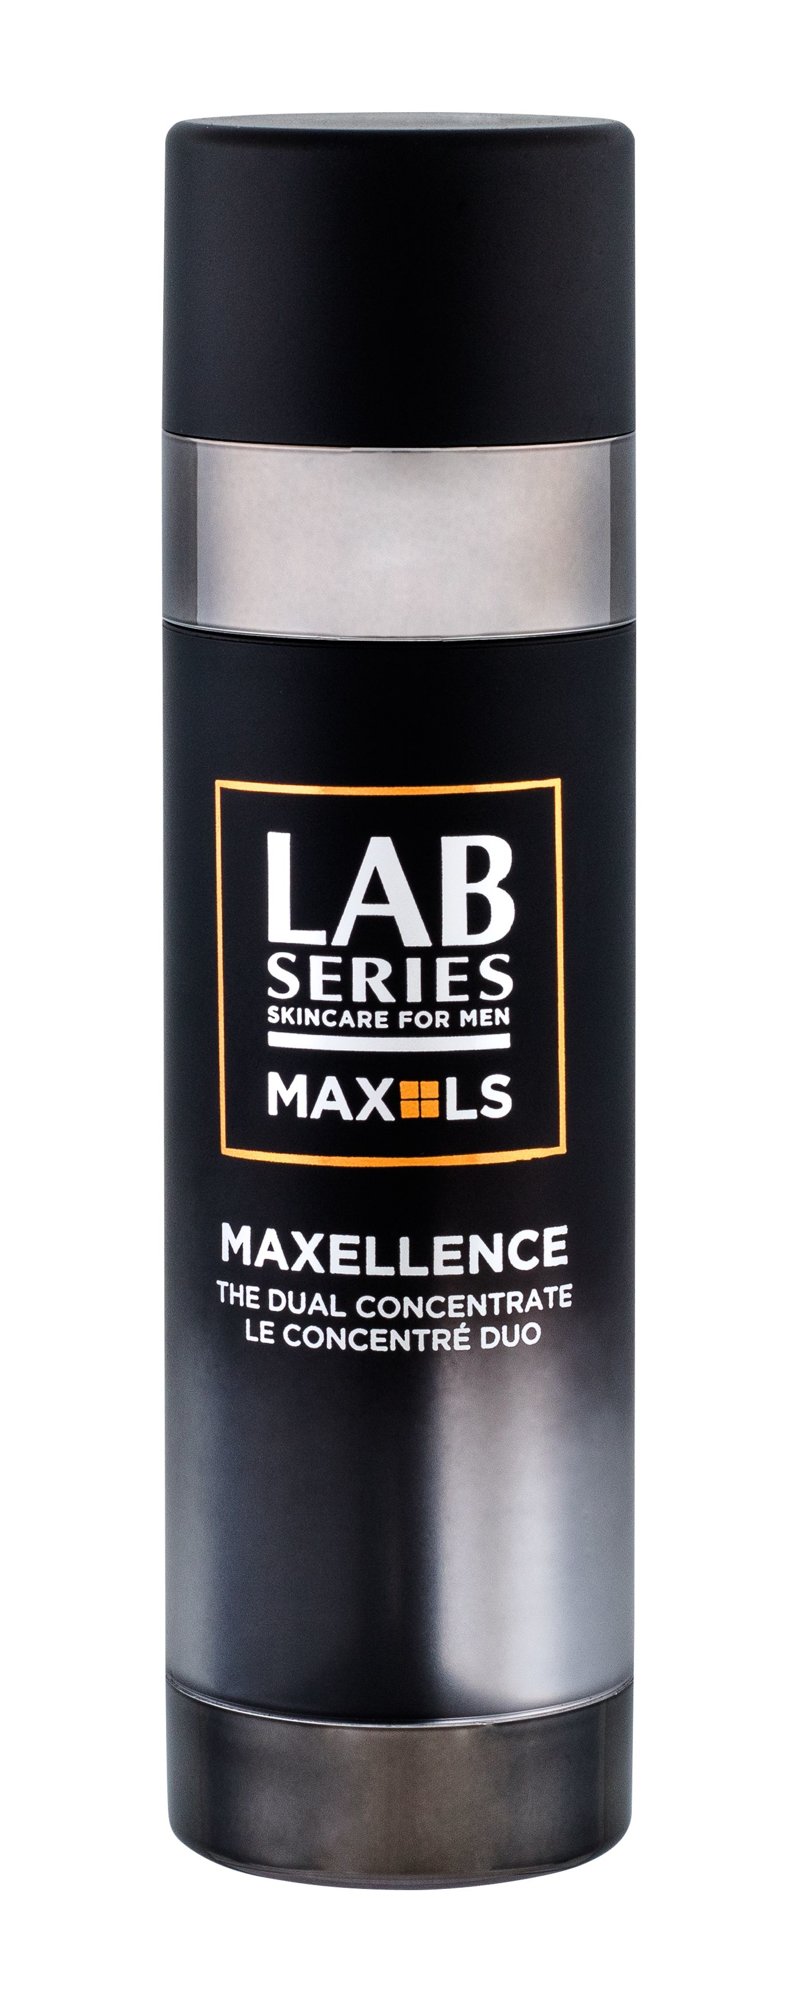 Lab Series MAX LS Maxellence The Dual Concentrate 50ml veido gelis